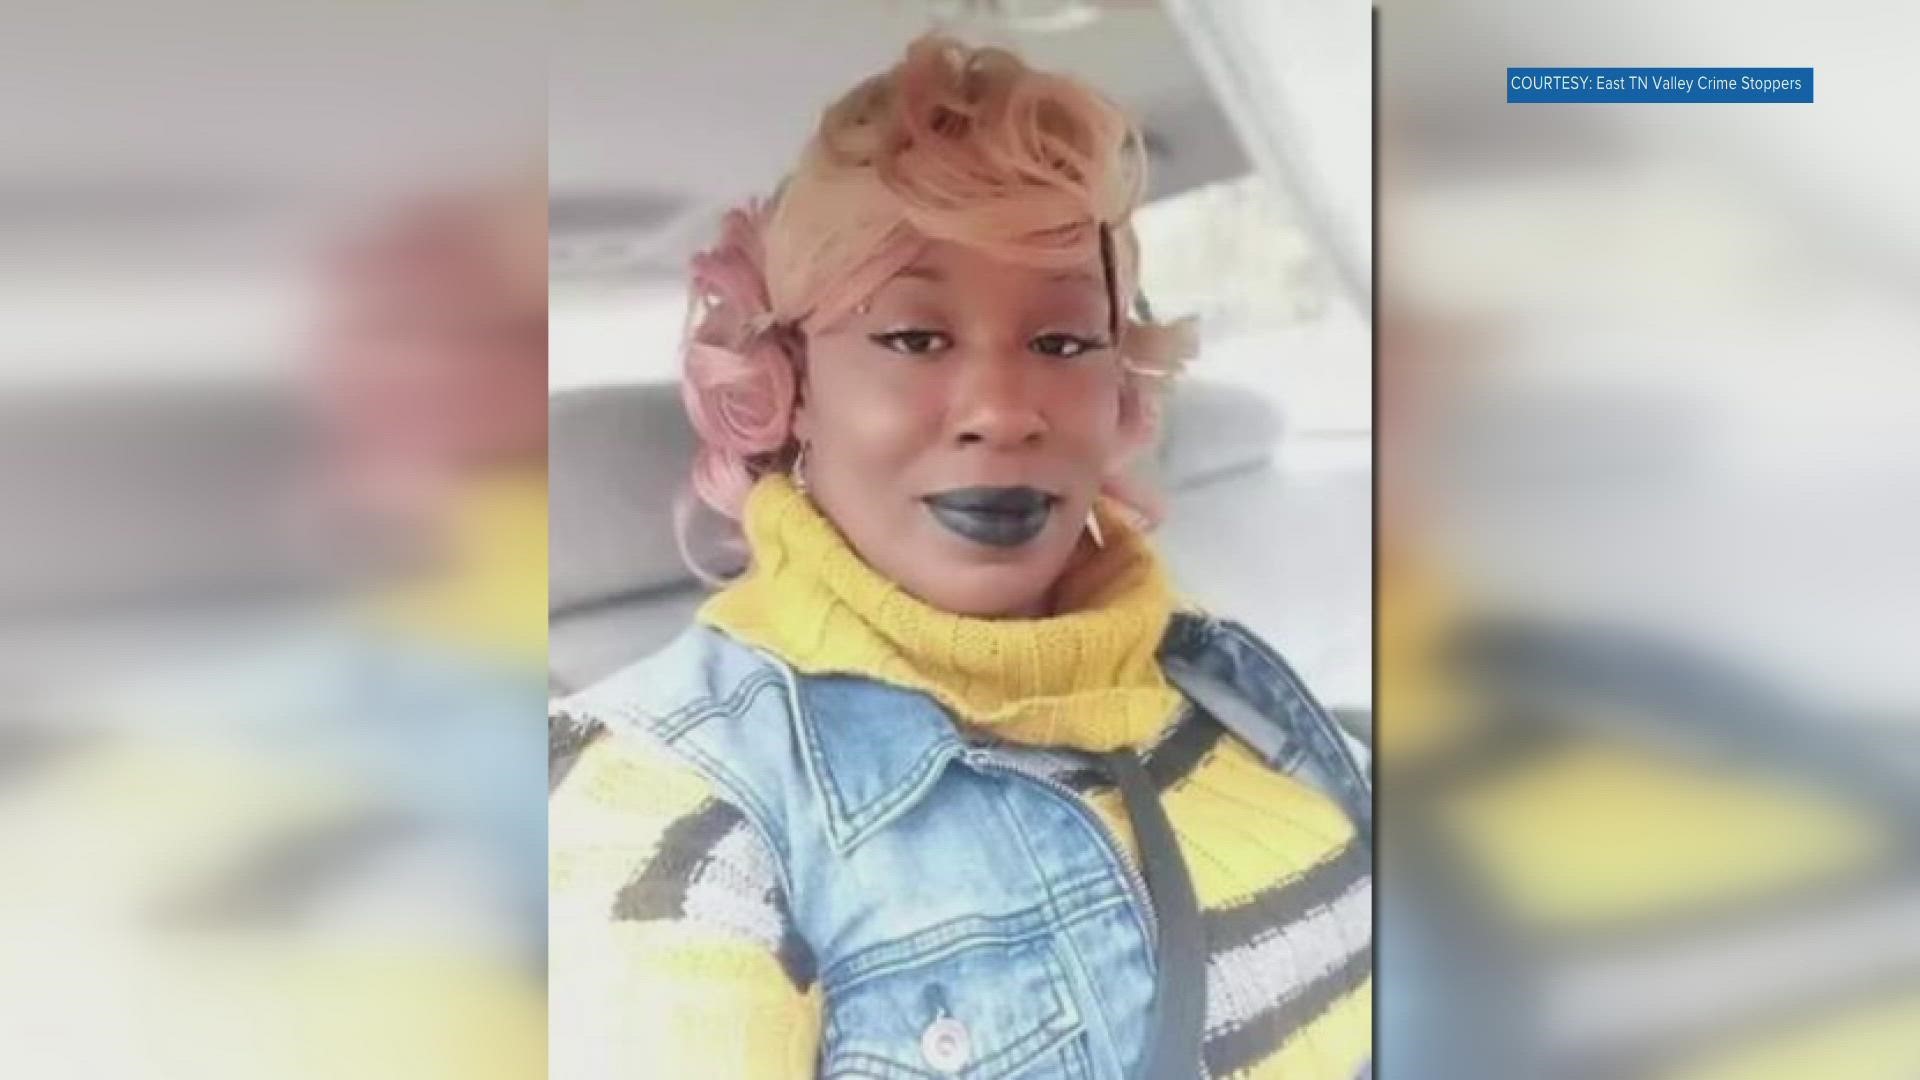 It's been one year to the day since Chaka Sligh died in a shooting in East Knoxville. Police are still trying to identify suspects in her killing.